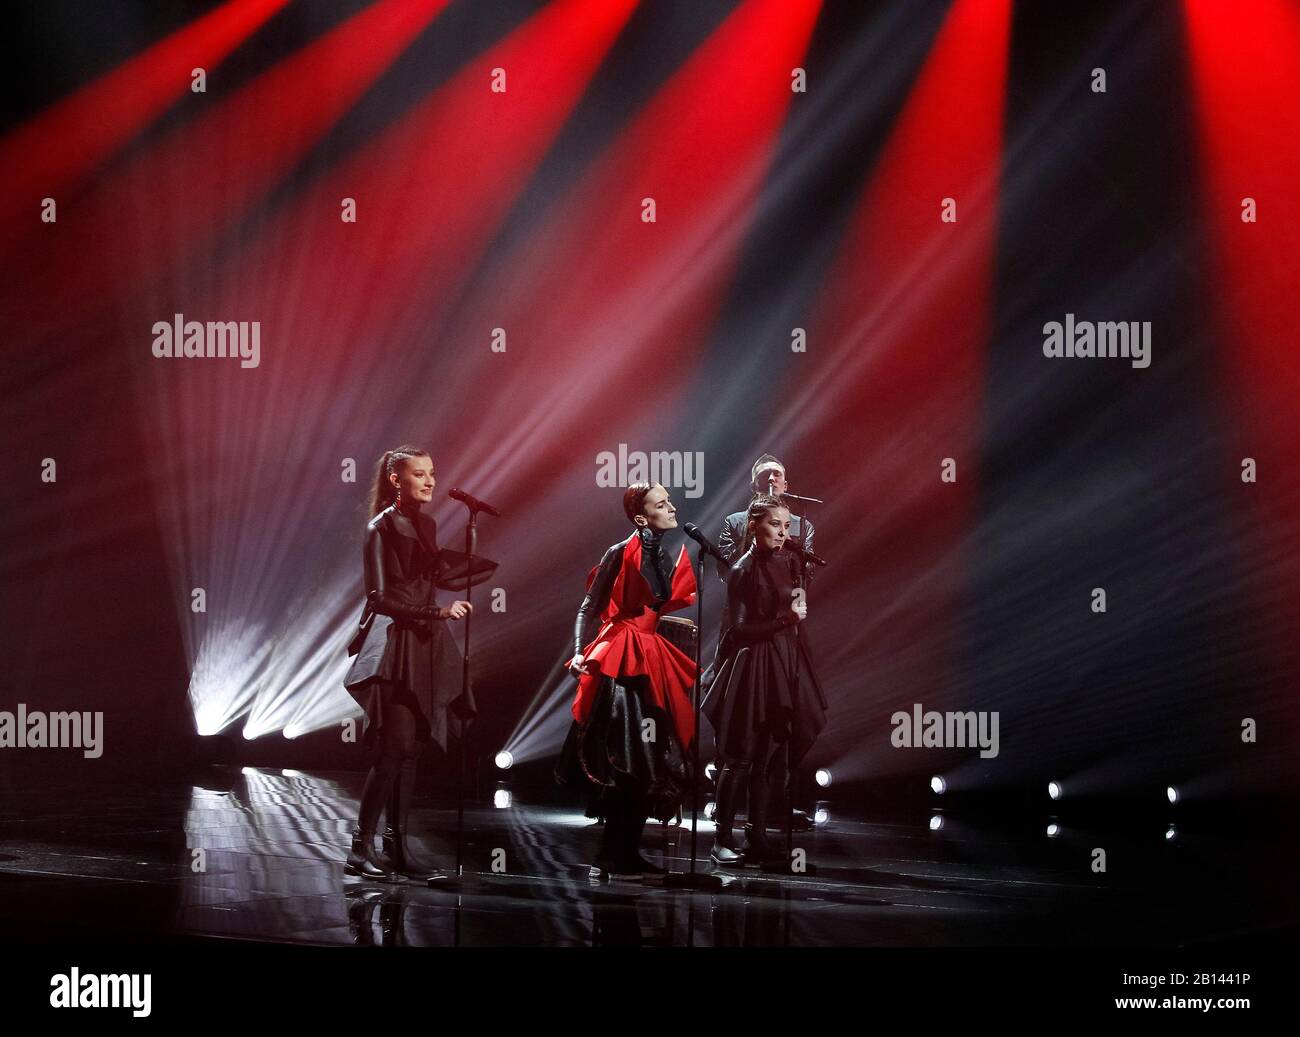 Kiev, Ukraine. 22nd Feb, 2020. Ukrainian band Go A perform live on a stage during the 2020 Eurovision Song Contest (ESC) national selection show in Kiev.Ukrainian band Go A with song Solovey will represent Ukraine at the 2020 Eurovision Song Contest (ESC) in Netherlands. The 65th anniversary Eurovision song contest will be held in Rotterdam (Netherlands) from May 12 to May 16, 2020. Ukraine, which missed the competition last year, intends to return to participation in 2020. Credit: SOPA Images Limited/Alamy Live News Stock Photo